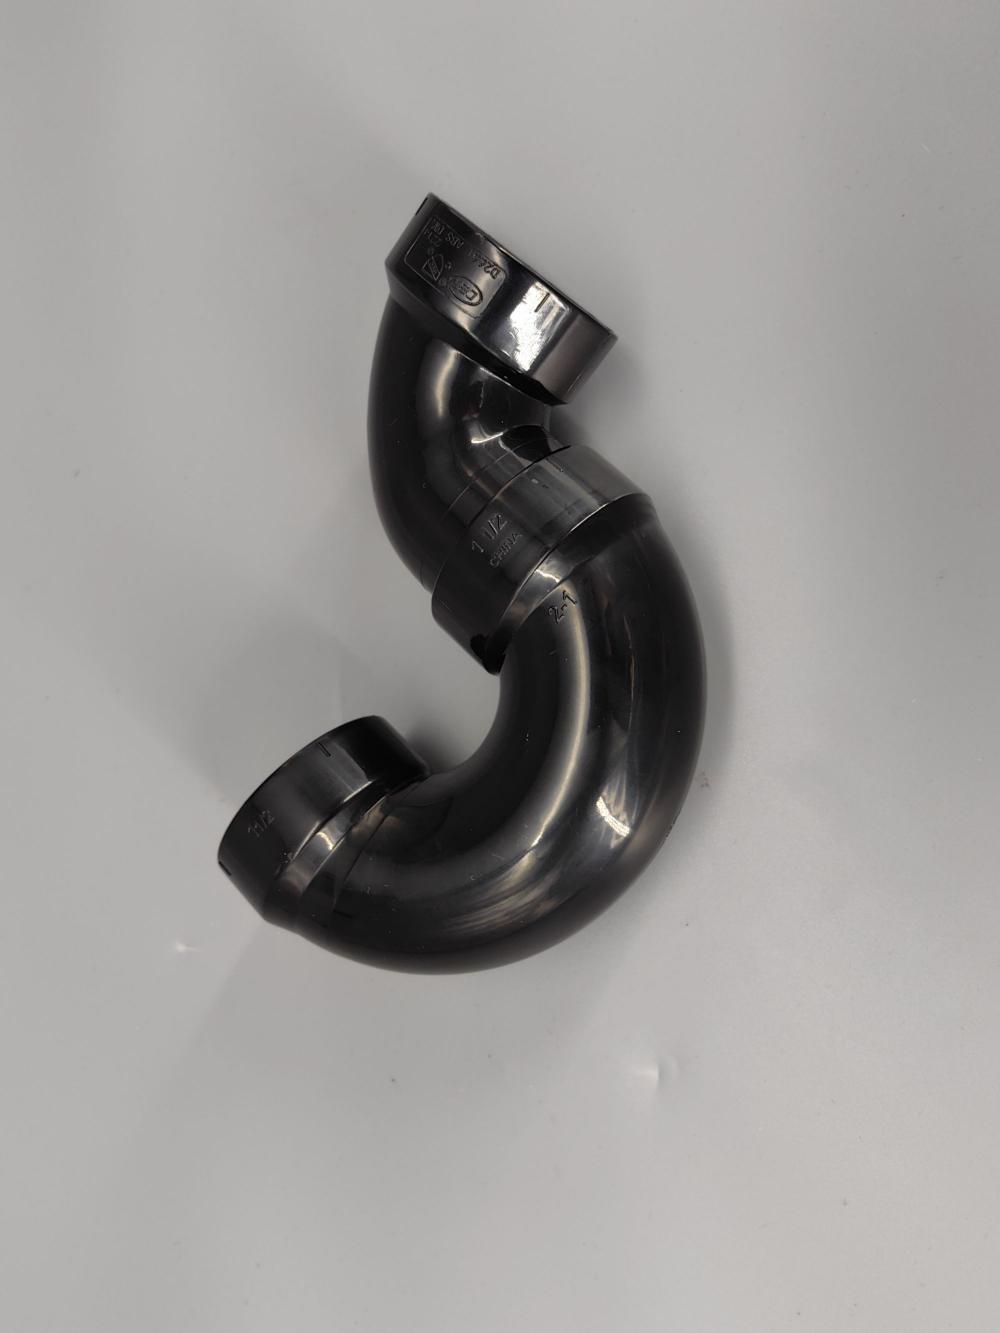 ABS pipe fittings 1.5 inch P-TRAP W/SOLVENT